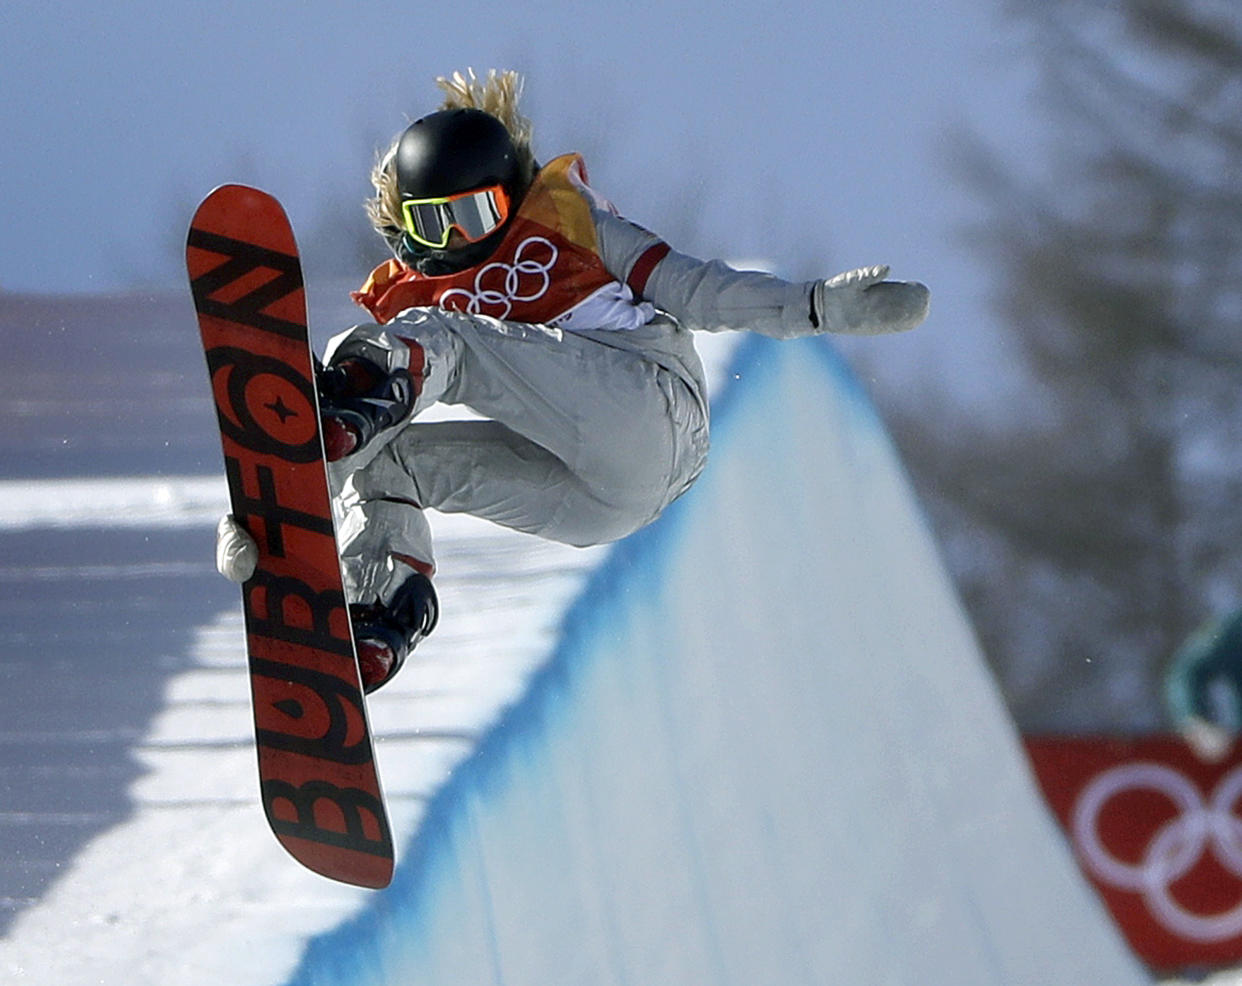 A radio host made an inappropriate comment about 17-year-old Olympic gold medalist Chloe Kim. (AP Photo/Gregory Bull)